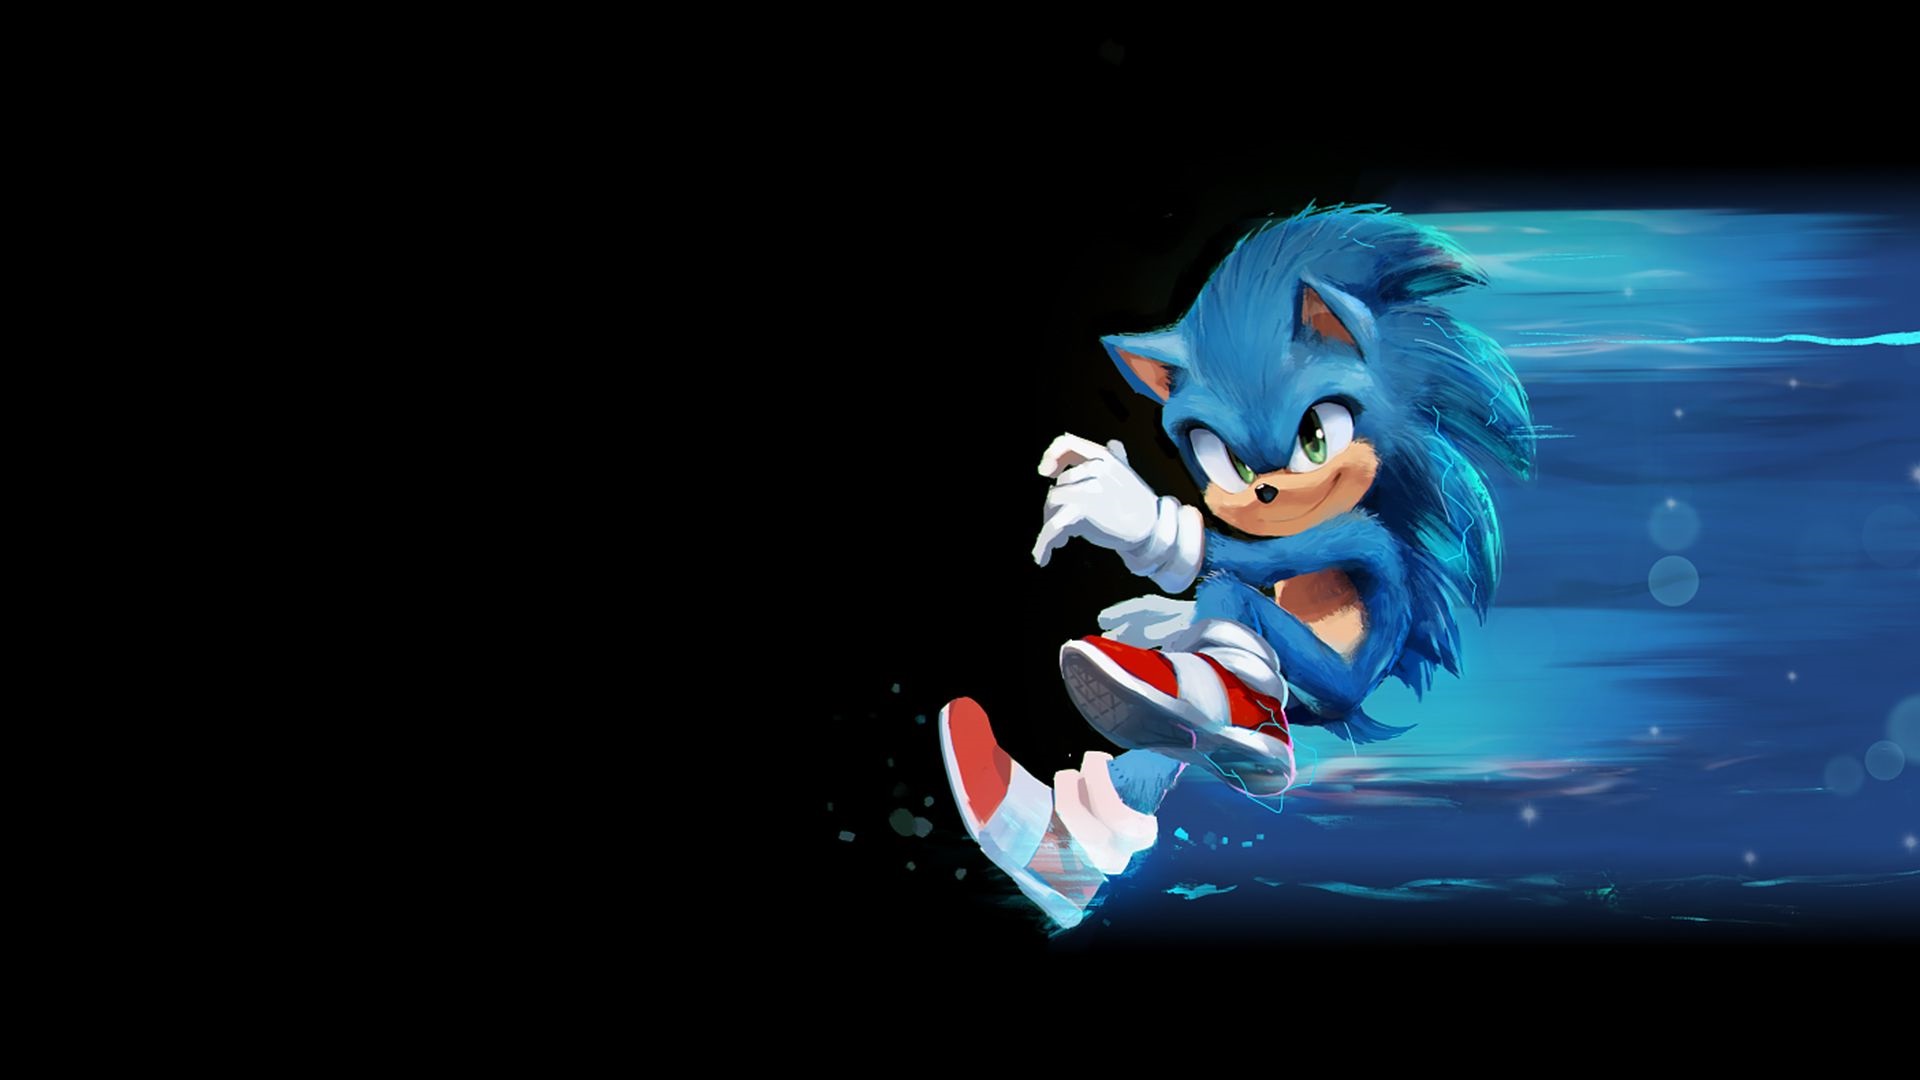 Wallpaper ID 386270  Video Game Sonic the Hedgehog Phone Wallpaper Miles  Tails Prower Green Eyes Sneakers Sonic Channel Blue Eyes 1080x1920  free download